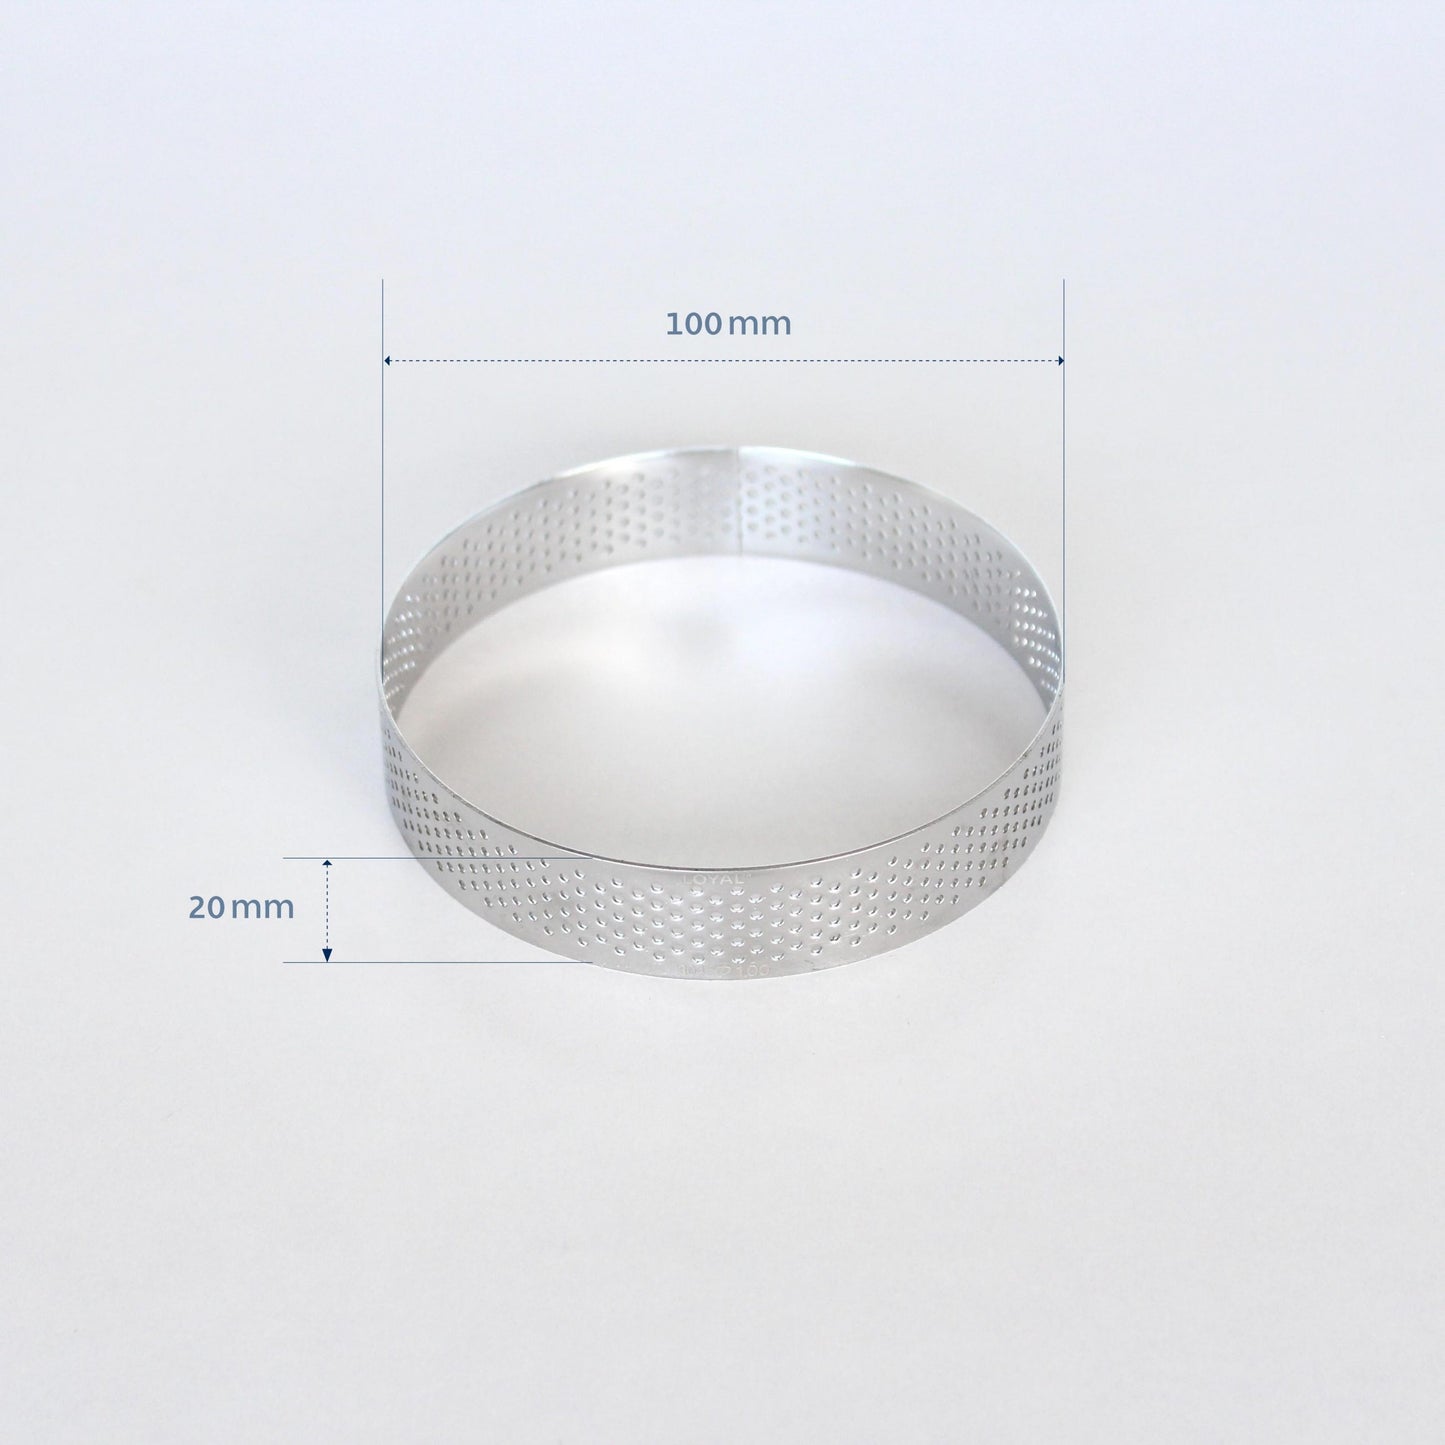 100mm PERFORATED RING S/S ROUND